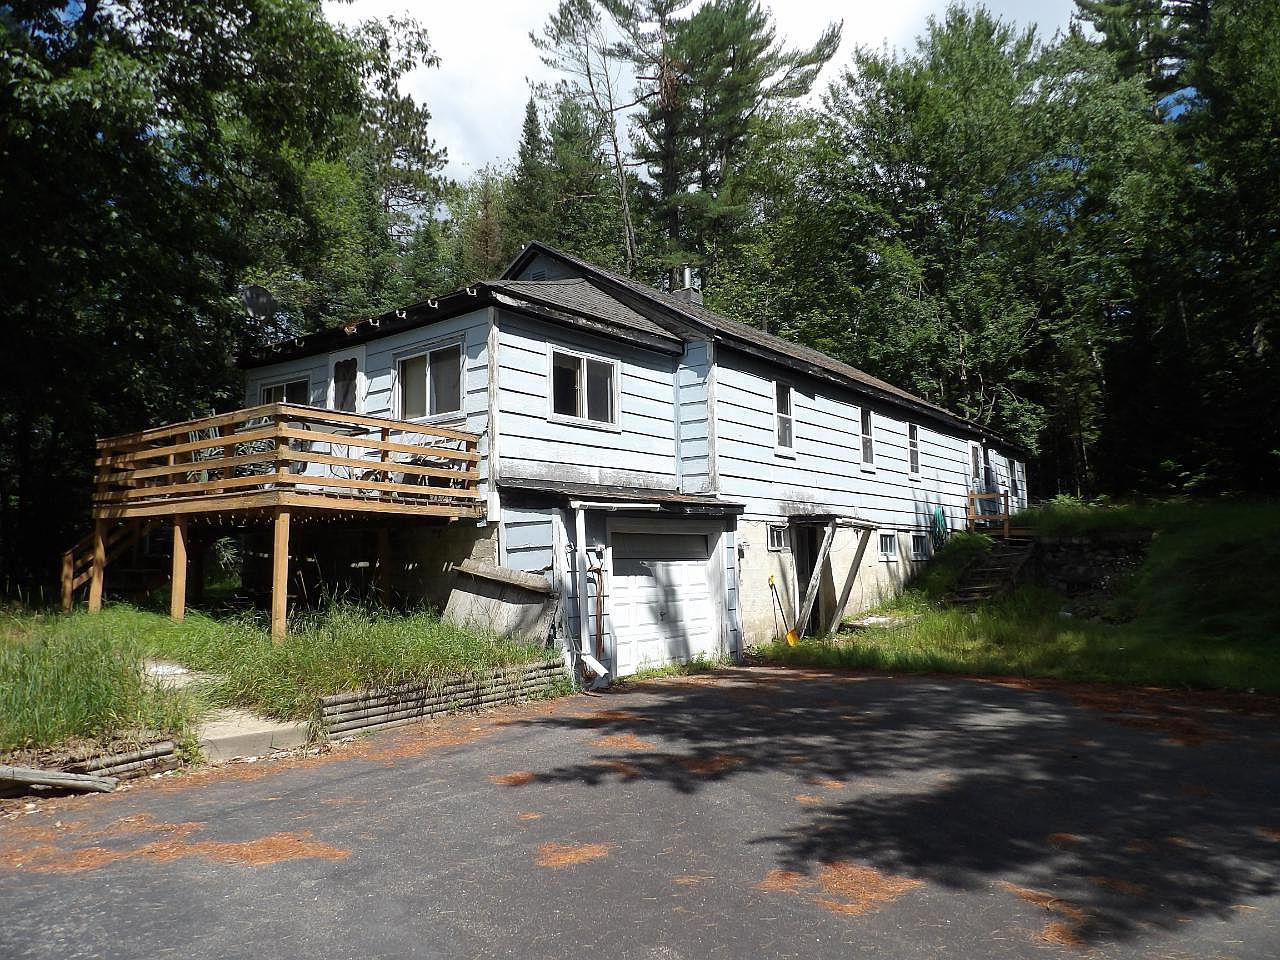 4025 Harshaw Rd, Harshaw, WI 54529 | MLS #198190 | Zillow